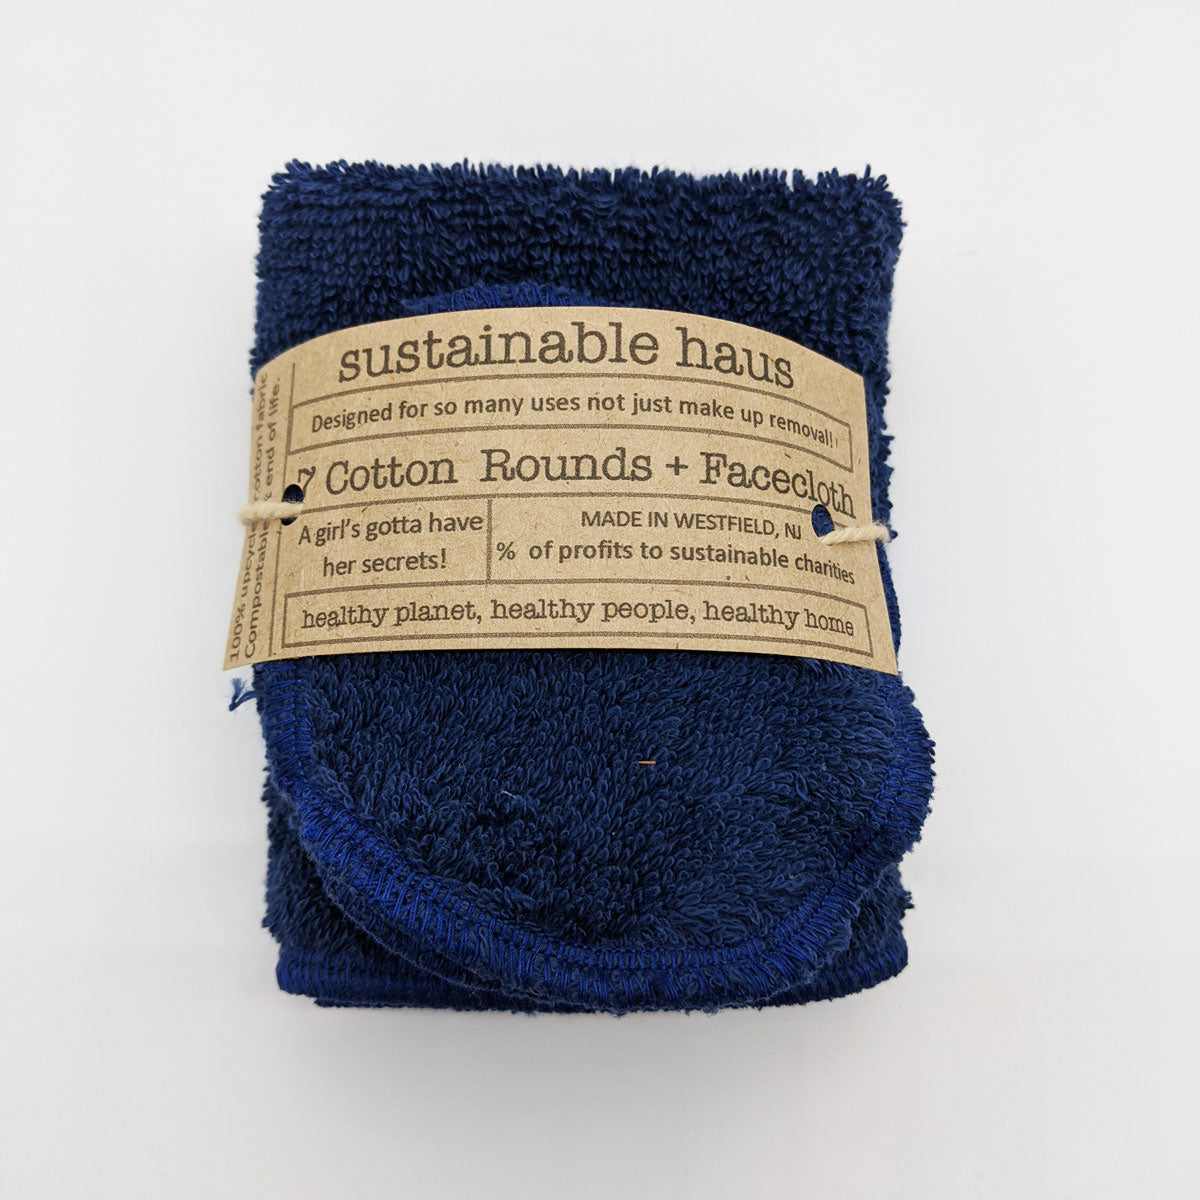 Reusable Cotton Rounds (7) with Washcloth by sustainable haus mercantile - navy blue